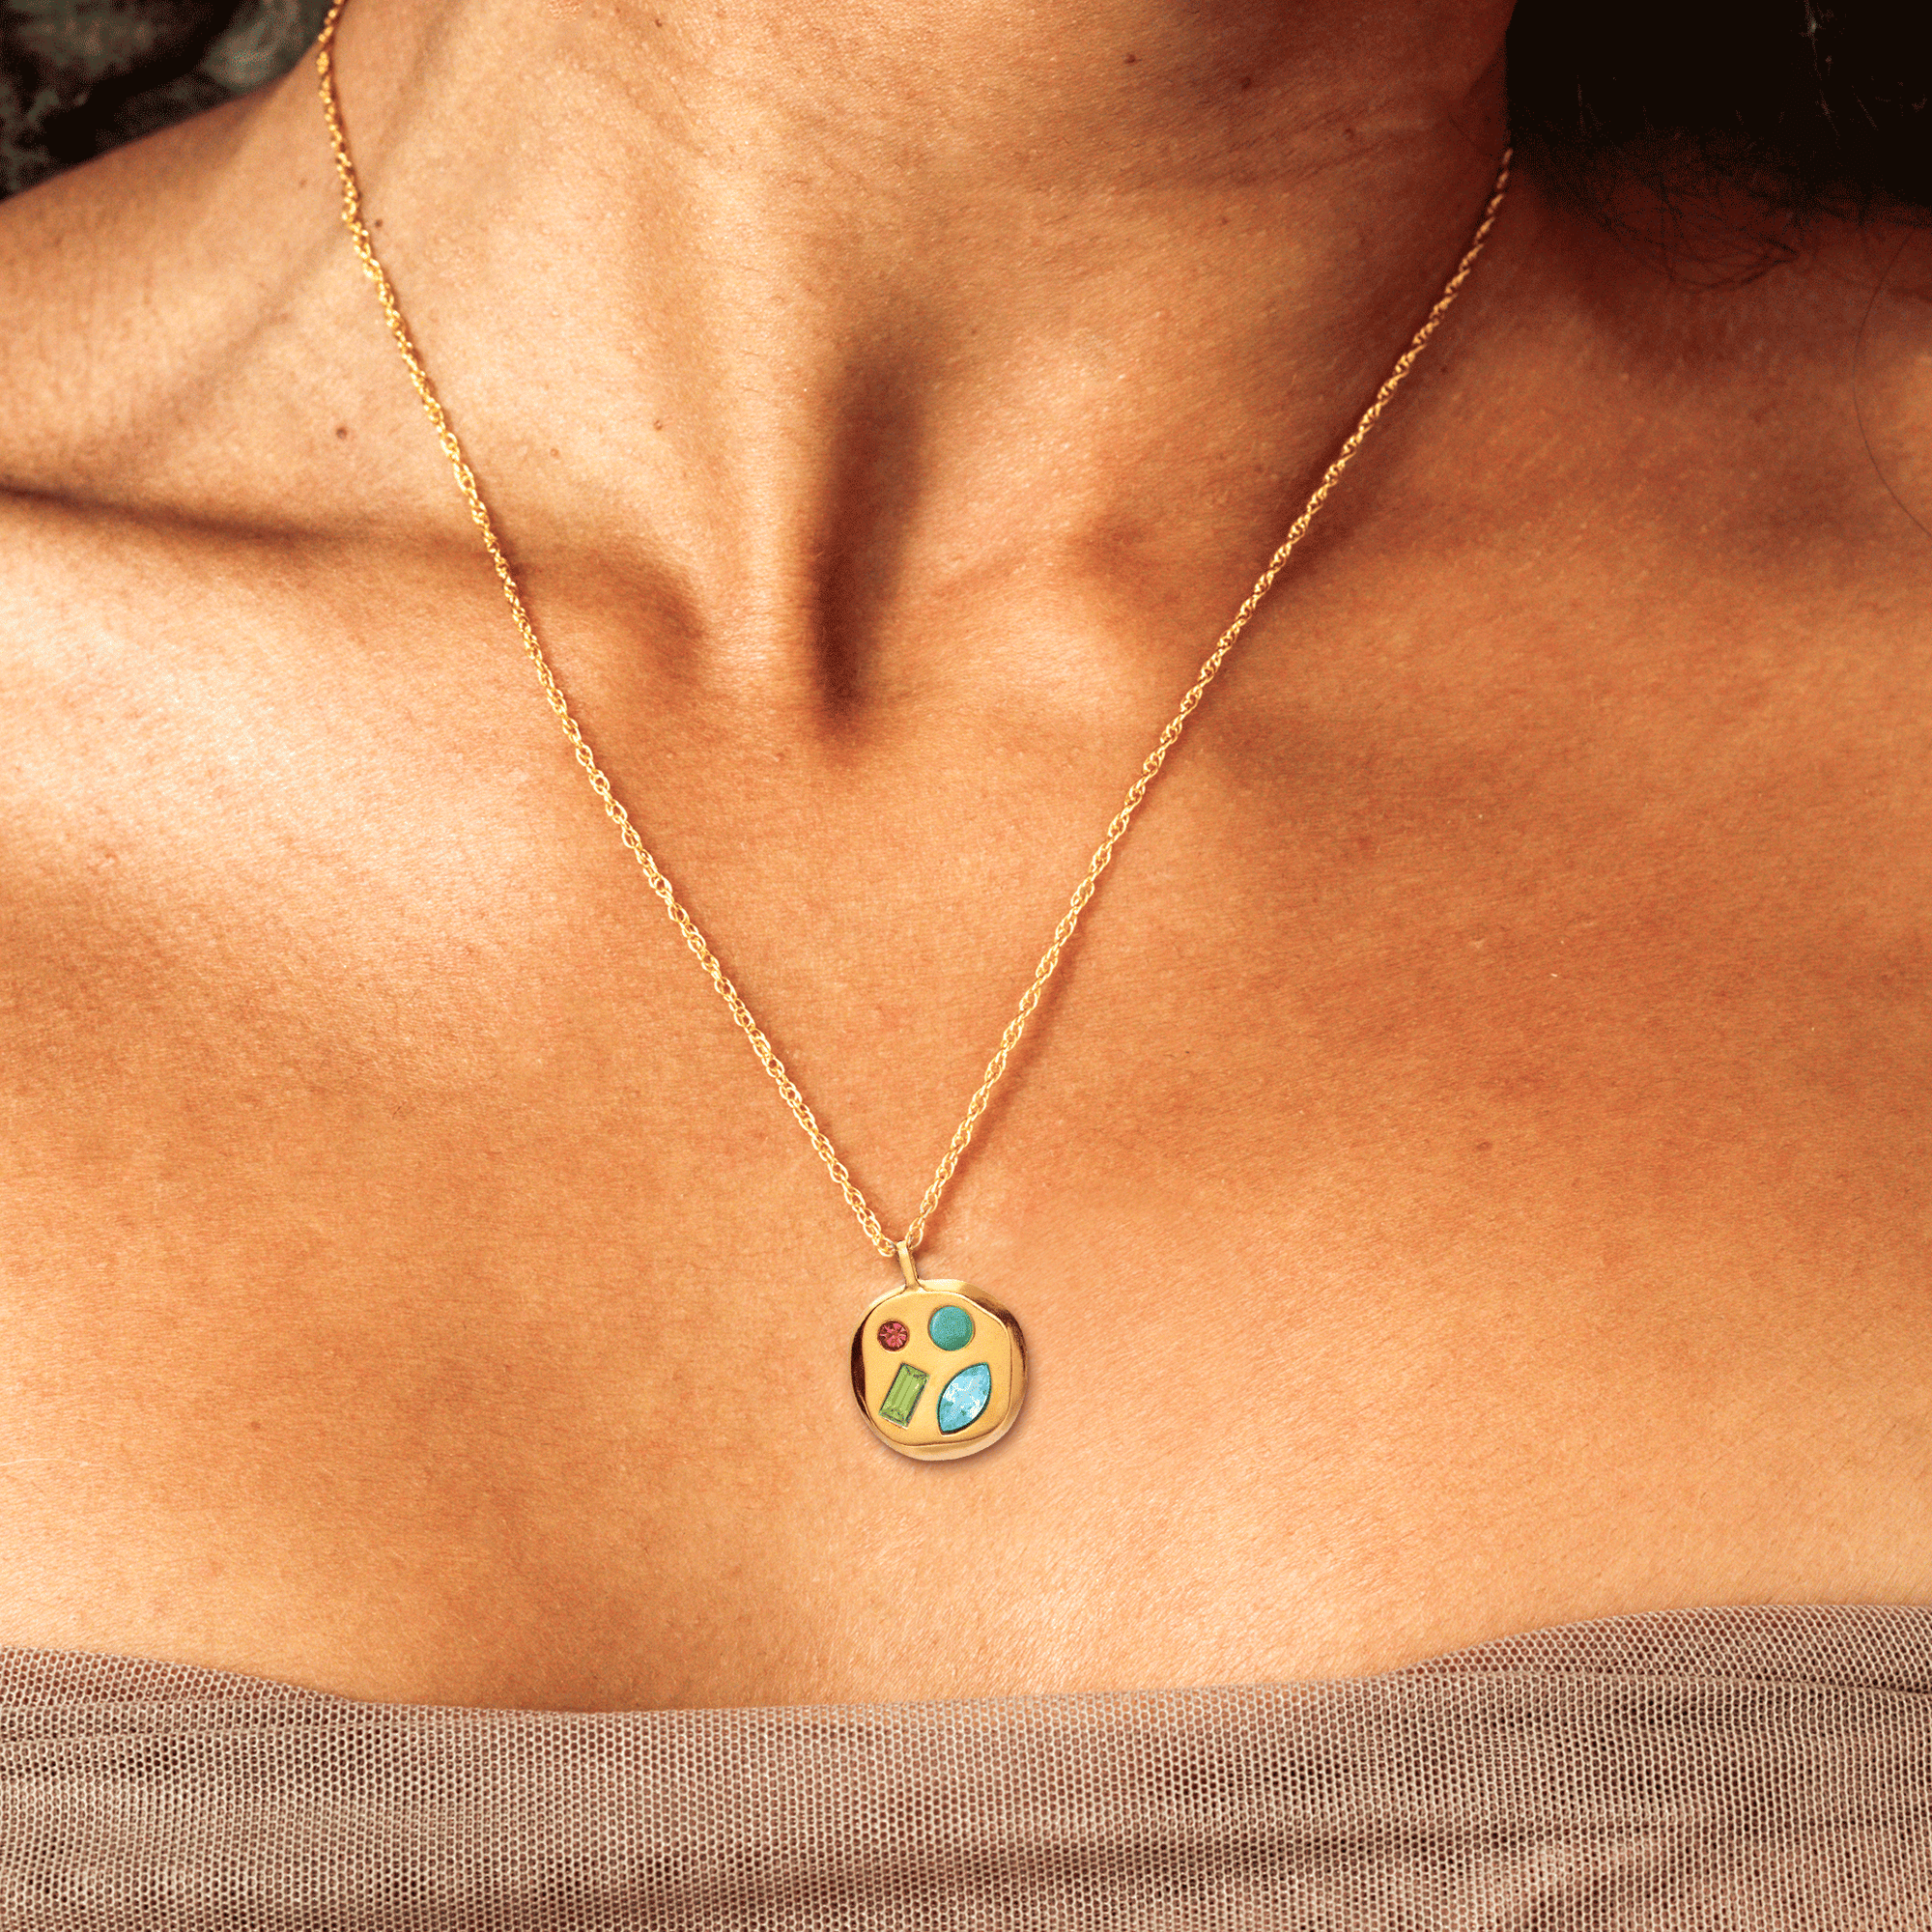 Person wearing The December Twelfth Pendant